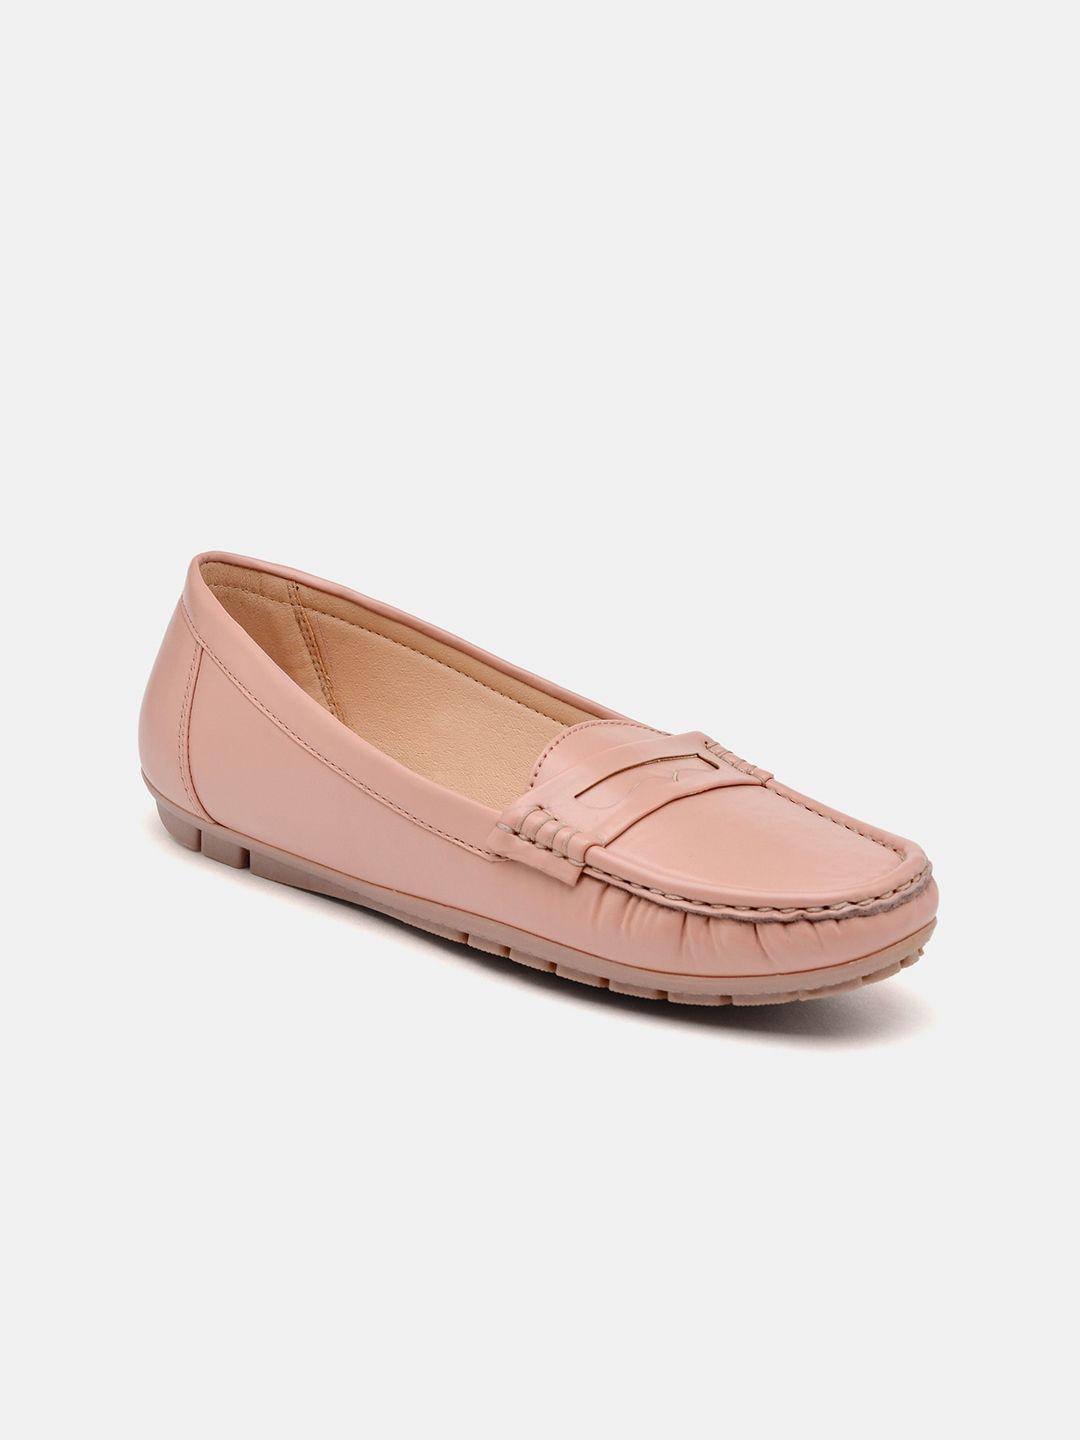 r&b women round toe penny loafers